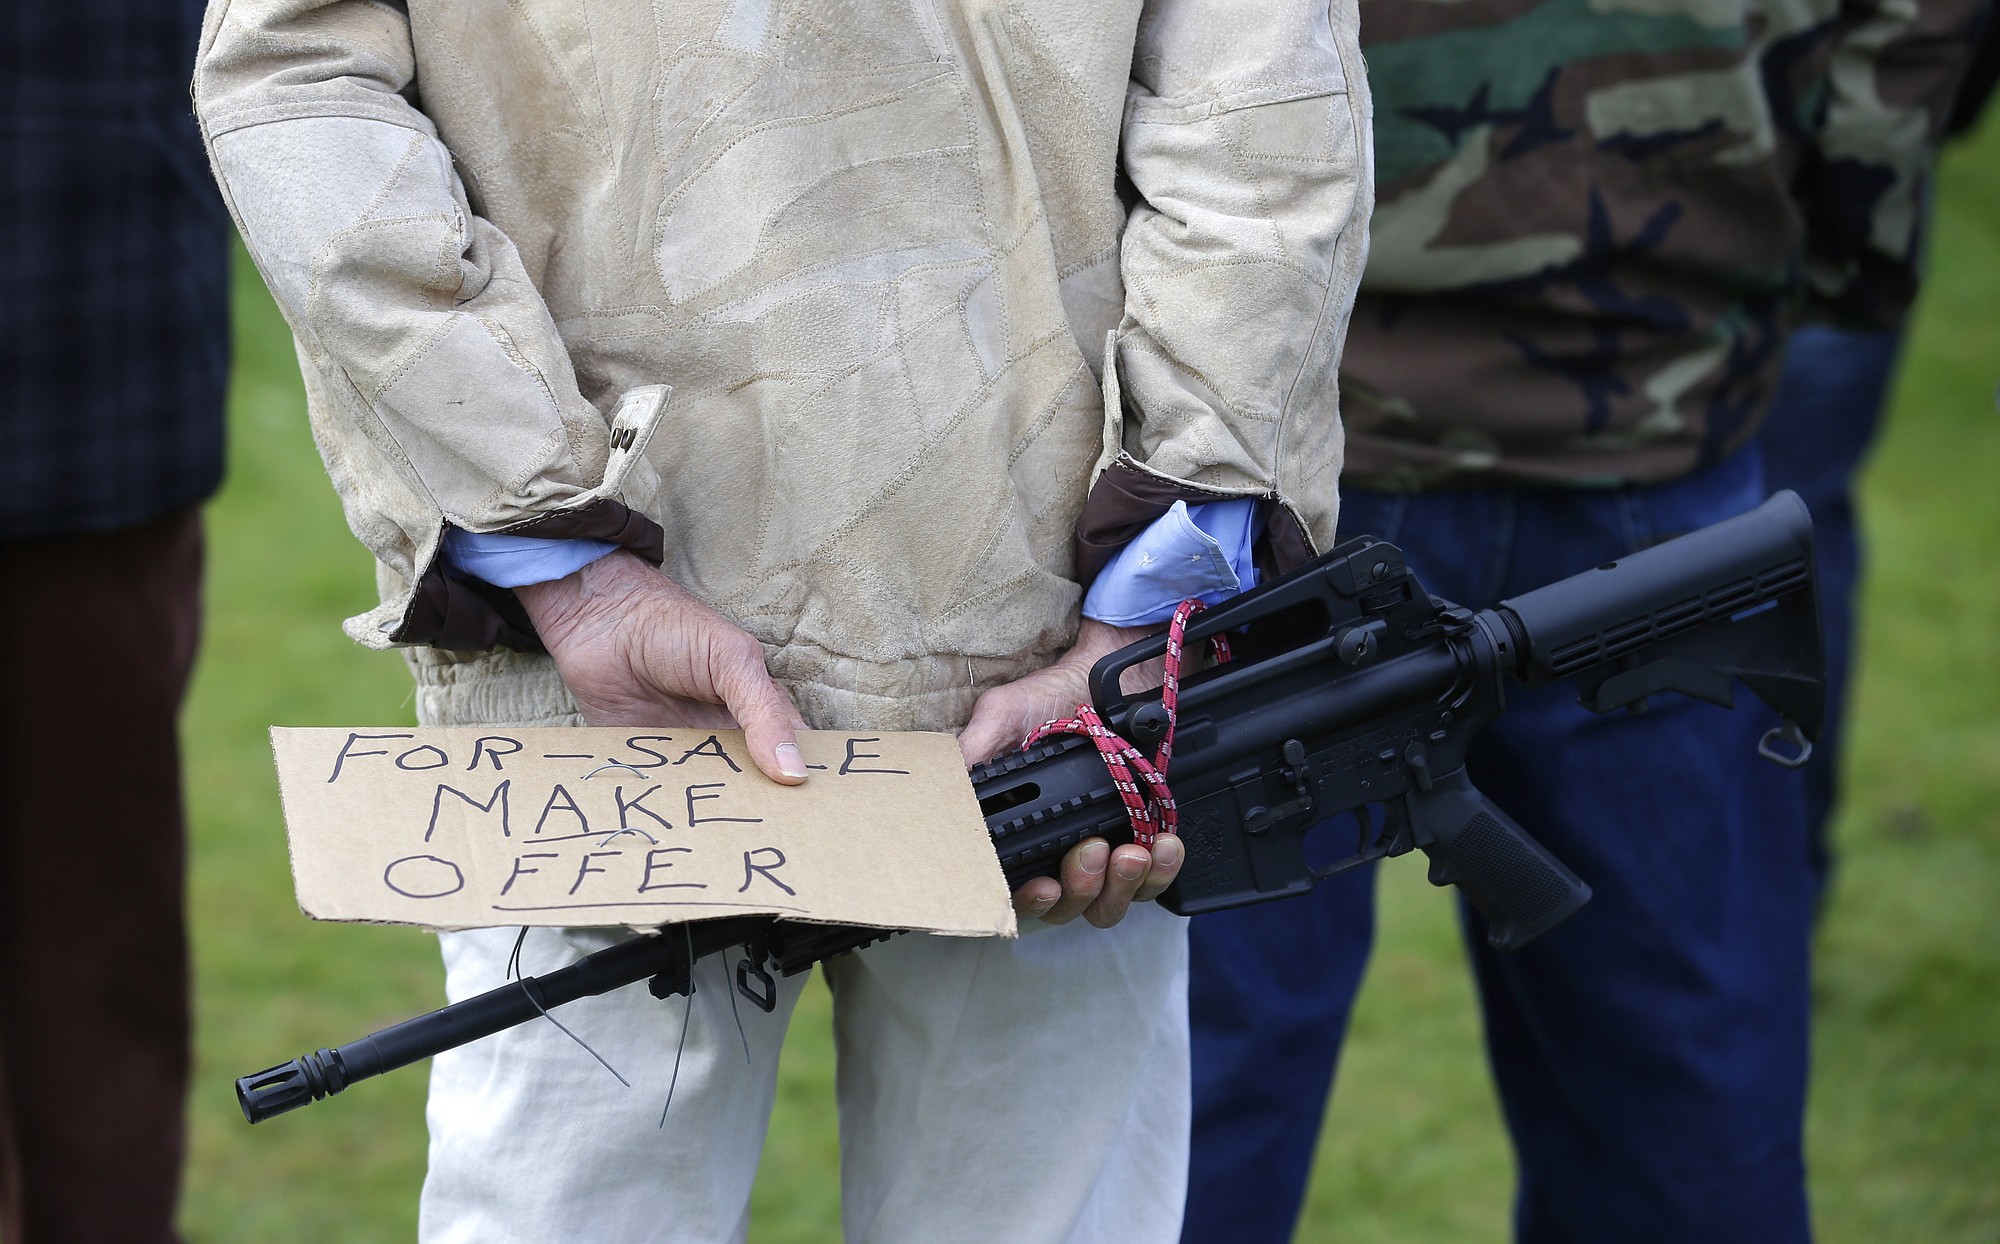 Ralph Eaton of Tacoma holds an Olympic Arms semi-automatic rifle and a sign that reads &quot;For-Sale Make Offer&quot; as he attends a gun rights rally at the Capitol in Olympia.